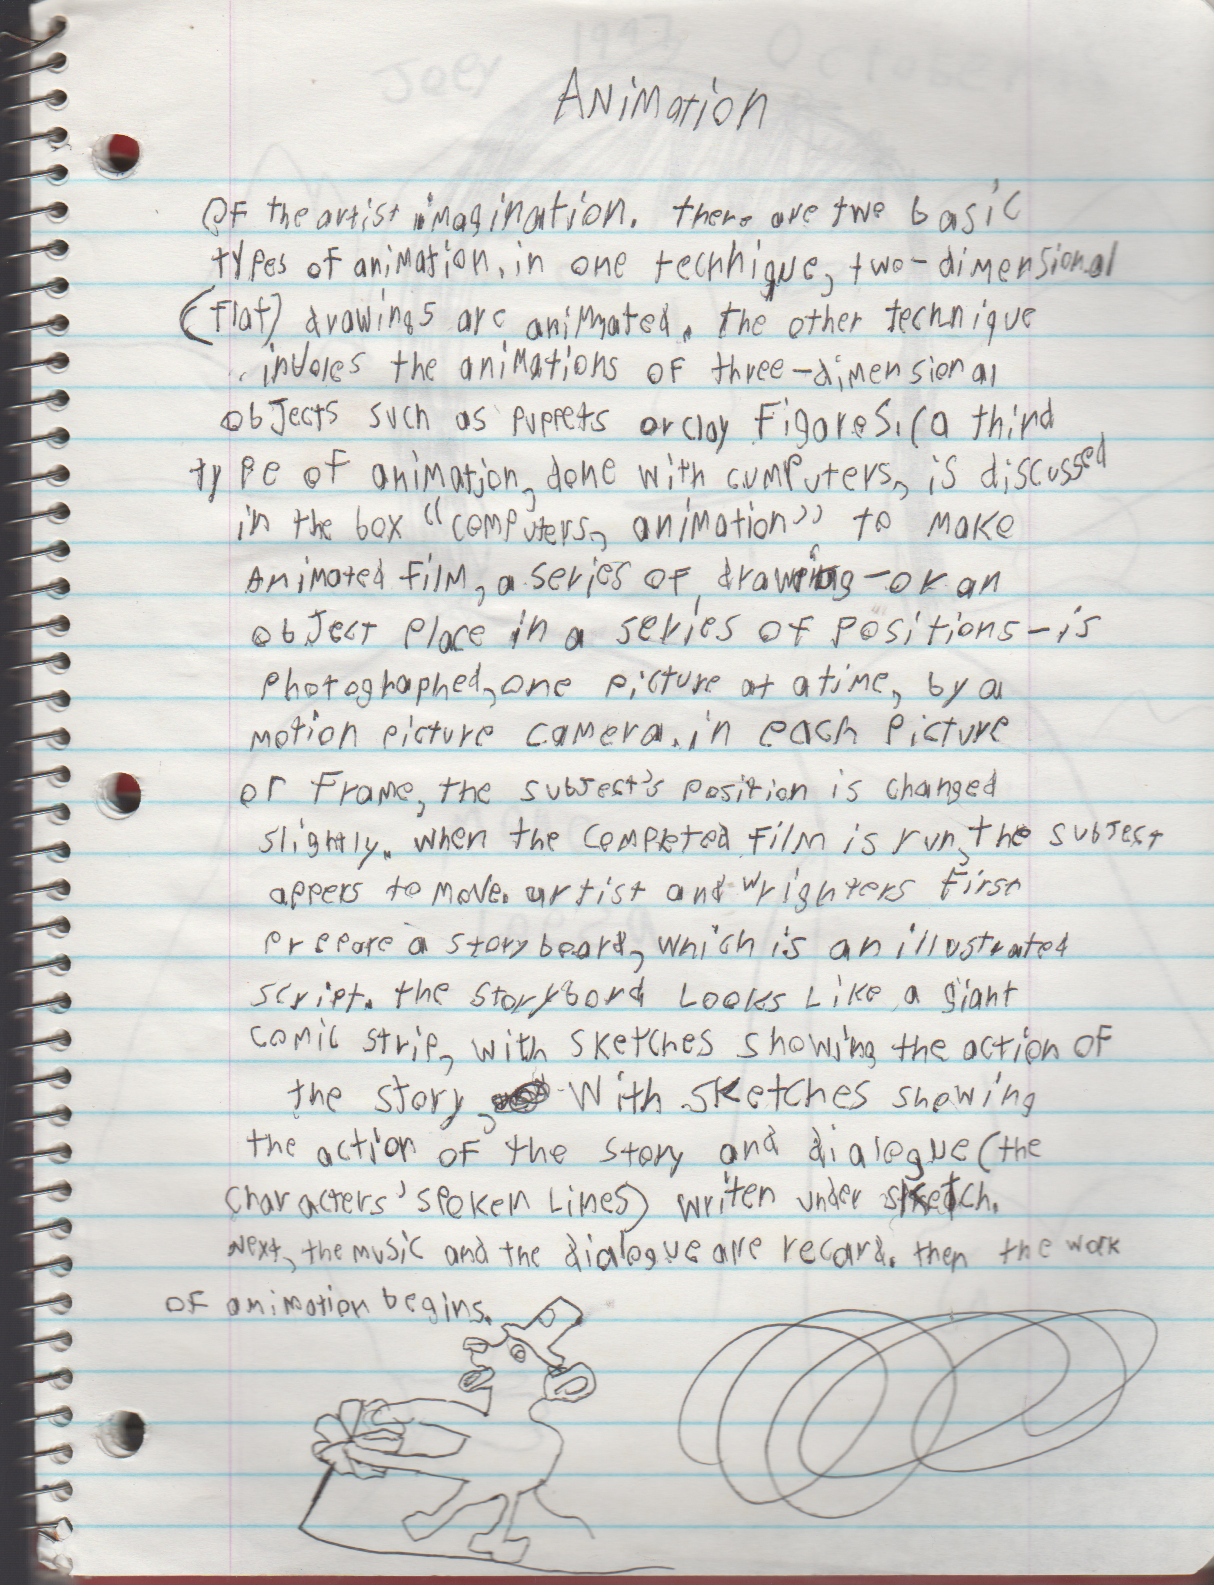 1996-08-18 - Saturday - 11 yr old Joey Arnold's School Book, dates through to 1998 apx, mostly 96, Writings, Drawings, Etc-009.png